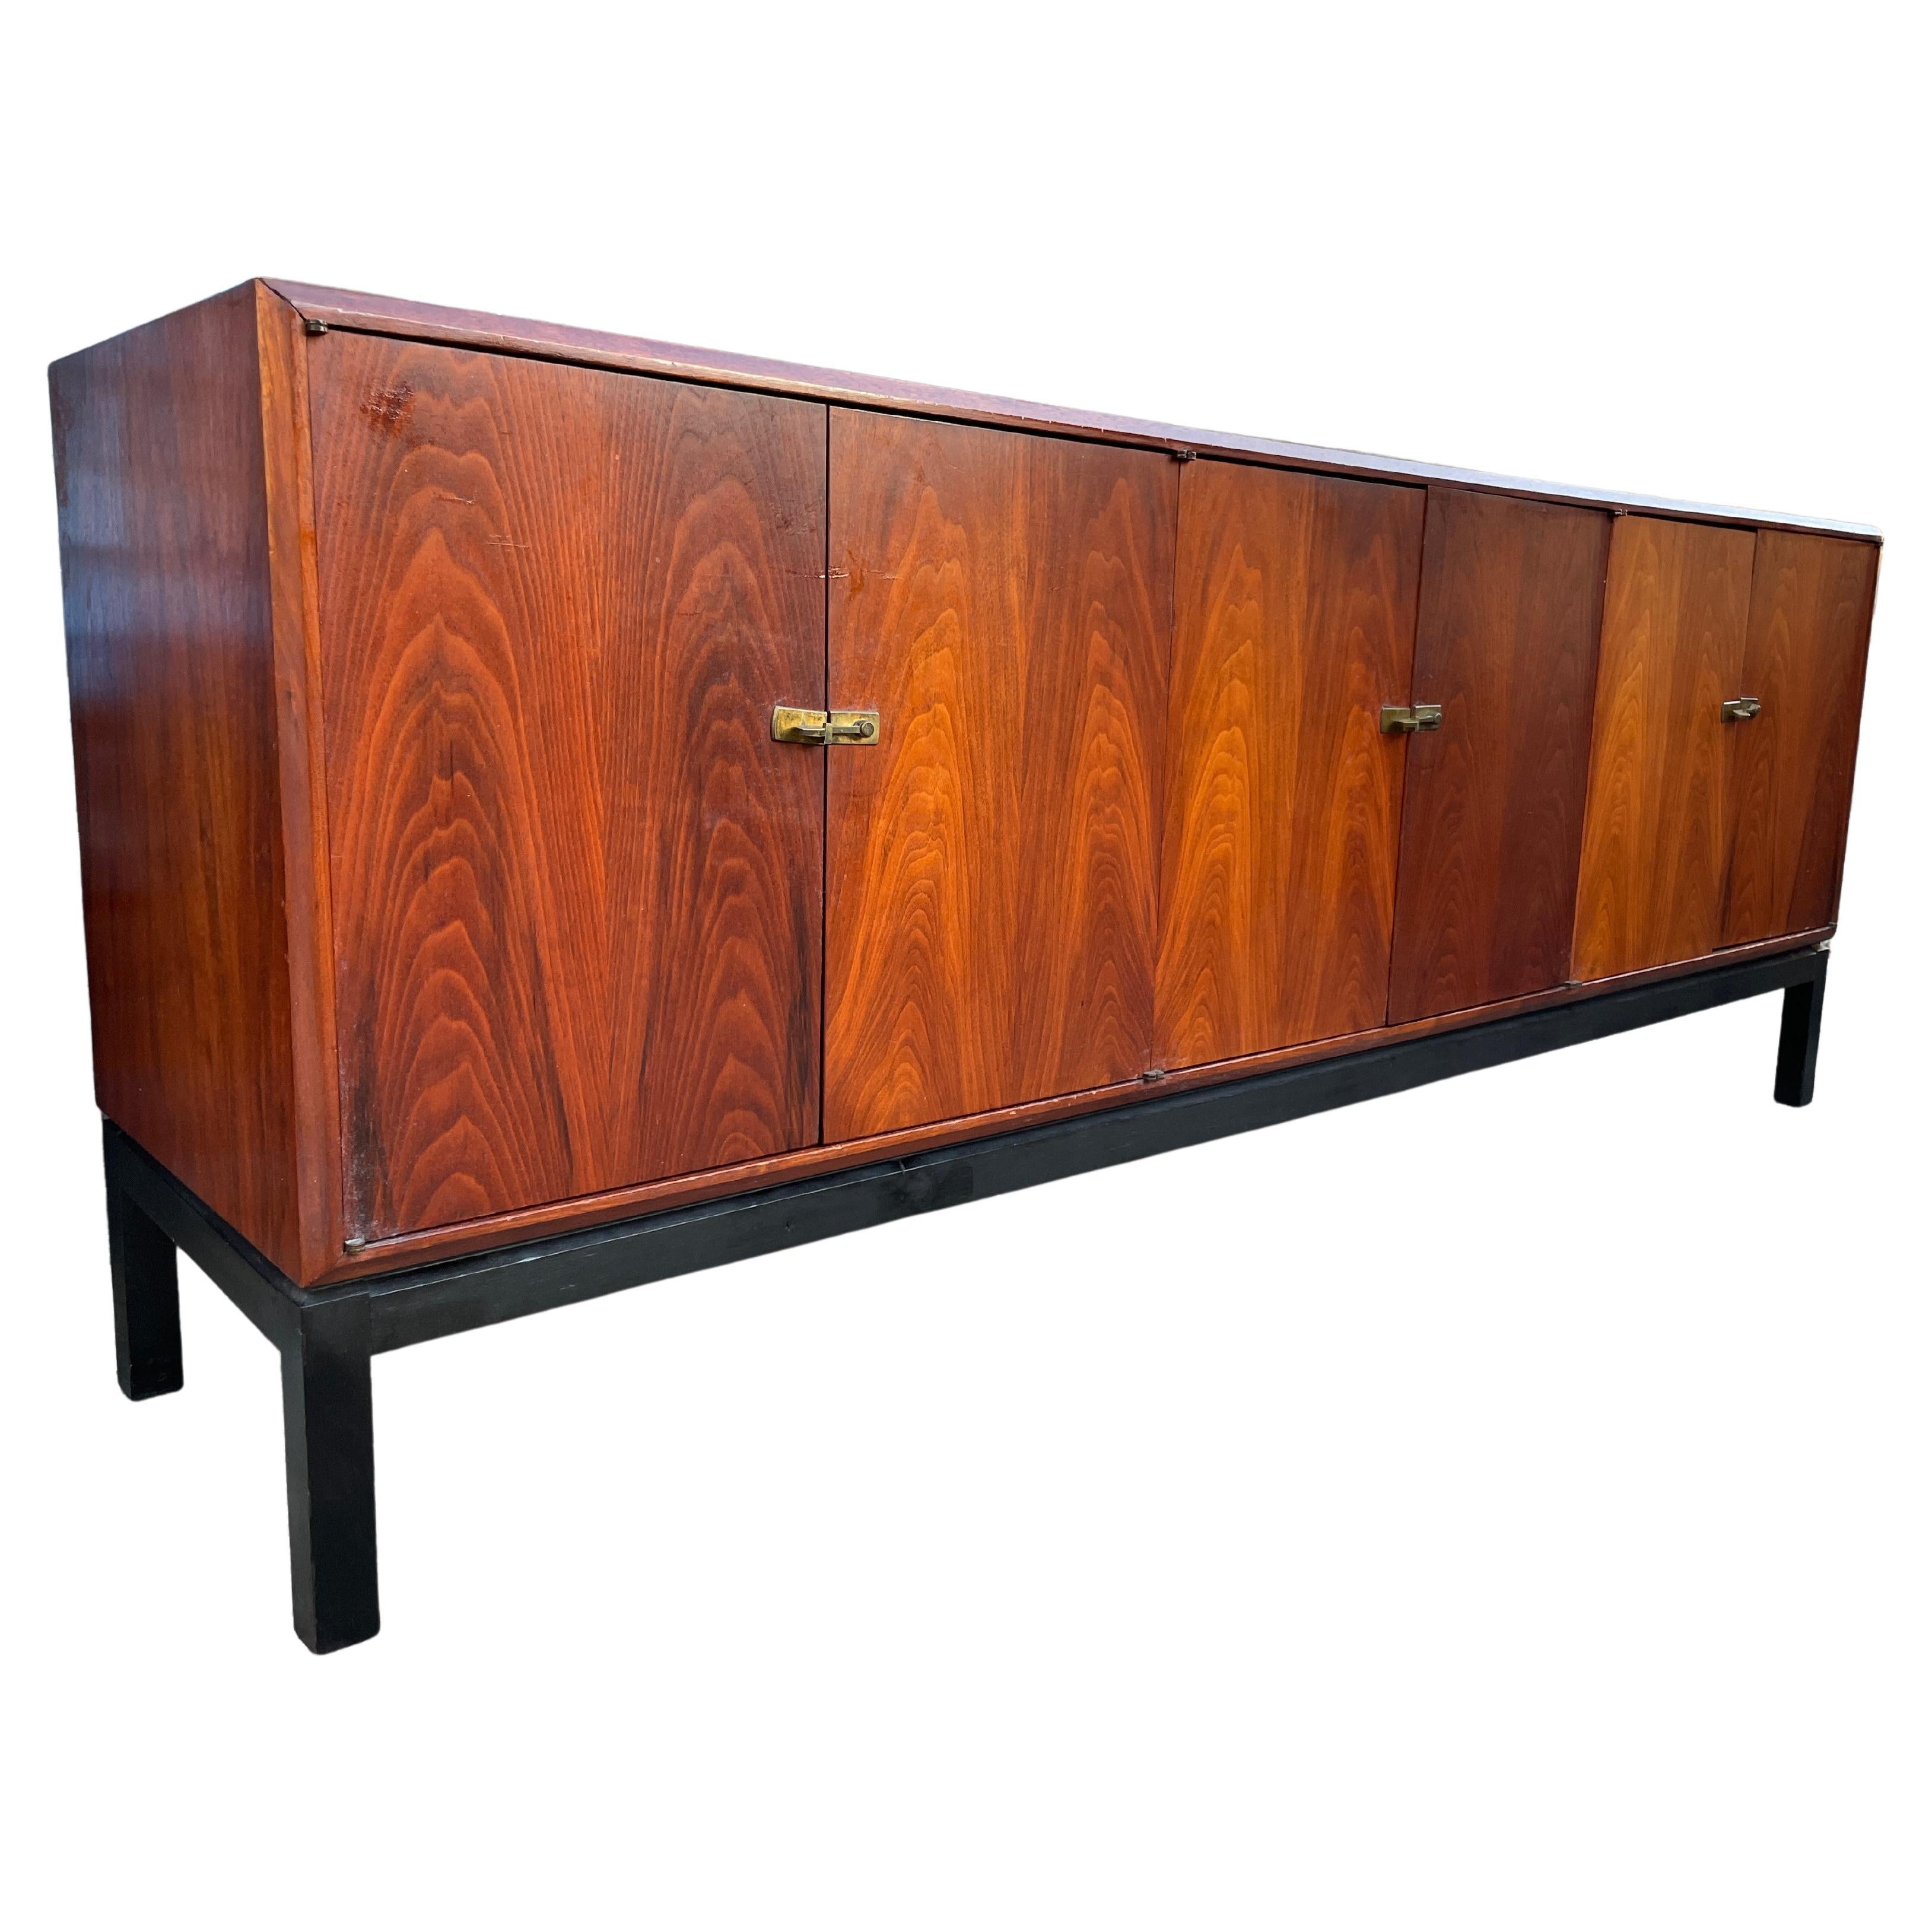 American Mid-Century Modern Walnut Credenza Sideboard 6 Cabinet Doors with 3 Drawers